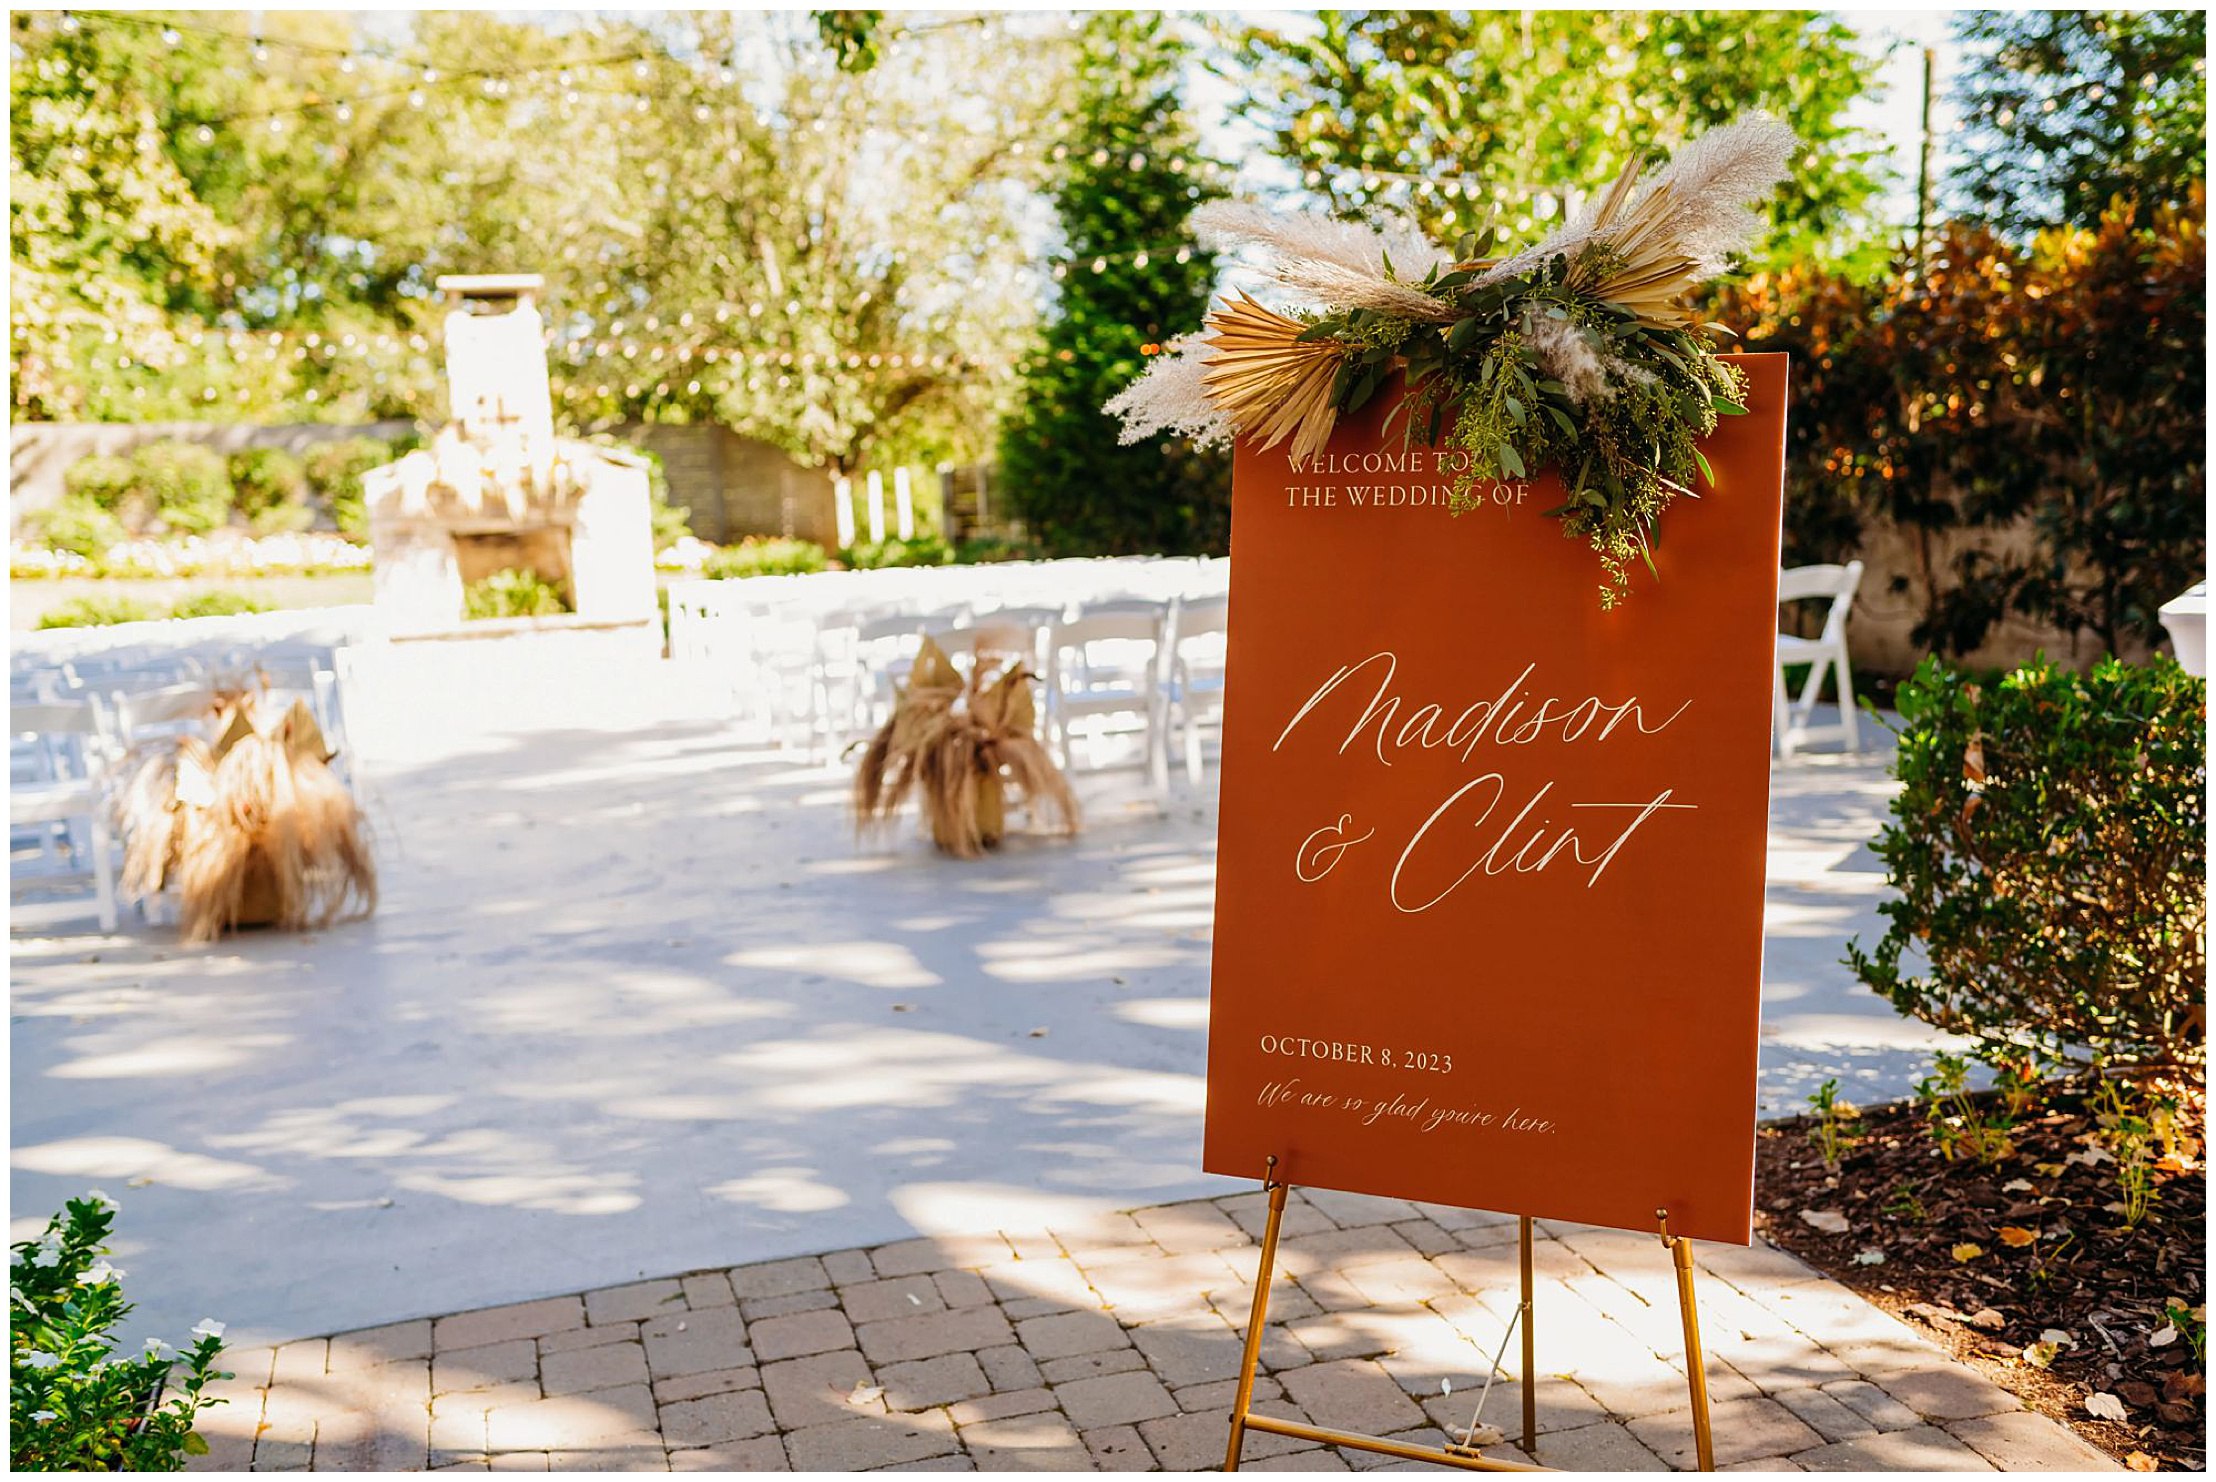 photo of wedding signage welcoming guests to the wedding at The Venue Chattanooga